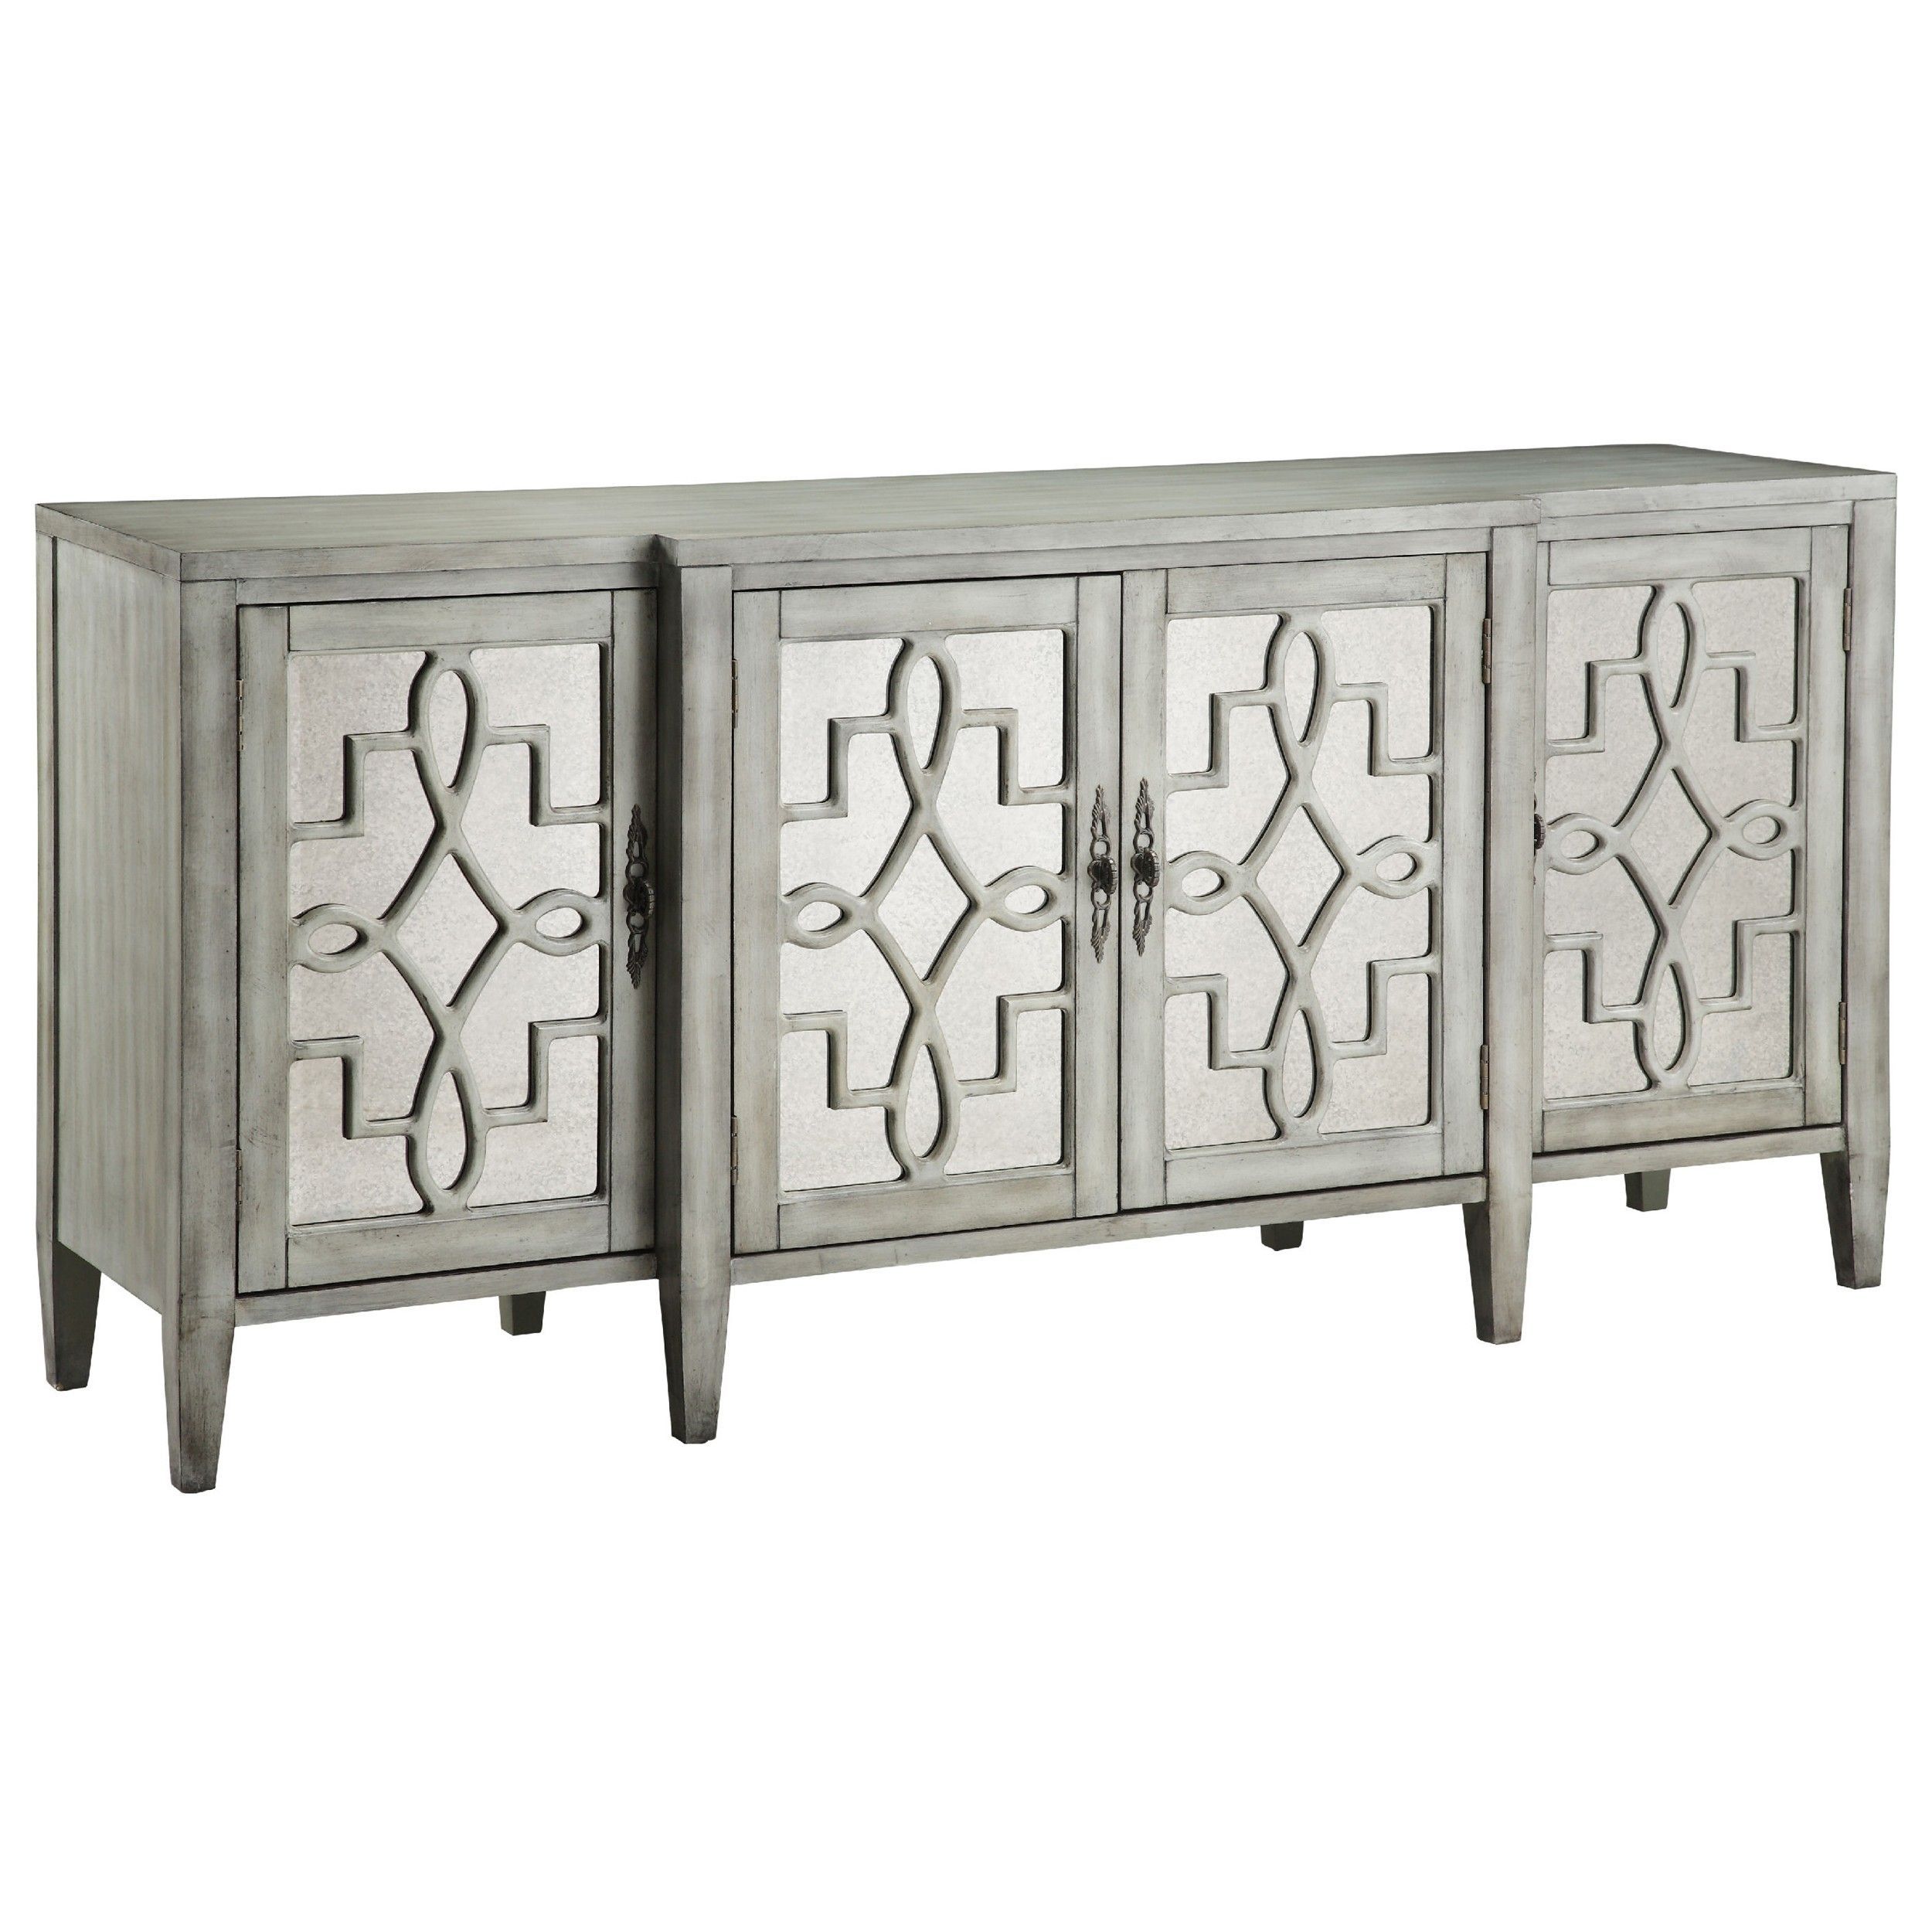 Isabelle Credenza | Furnishings | Pinterest | Credenza, Sideboard Within 2 Door Mirror Front Sideboards (View 3 of 30)